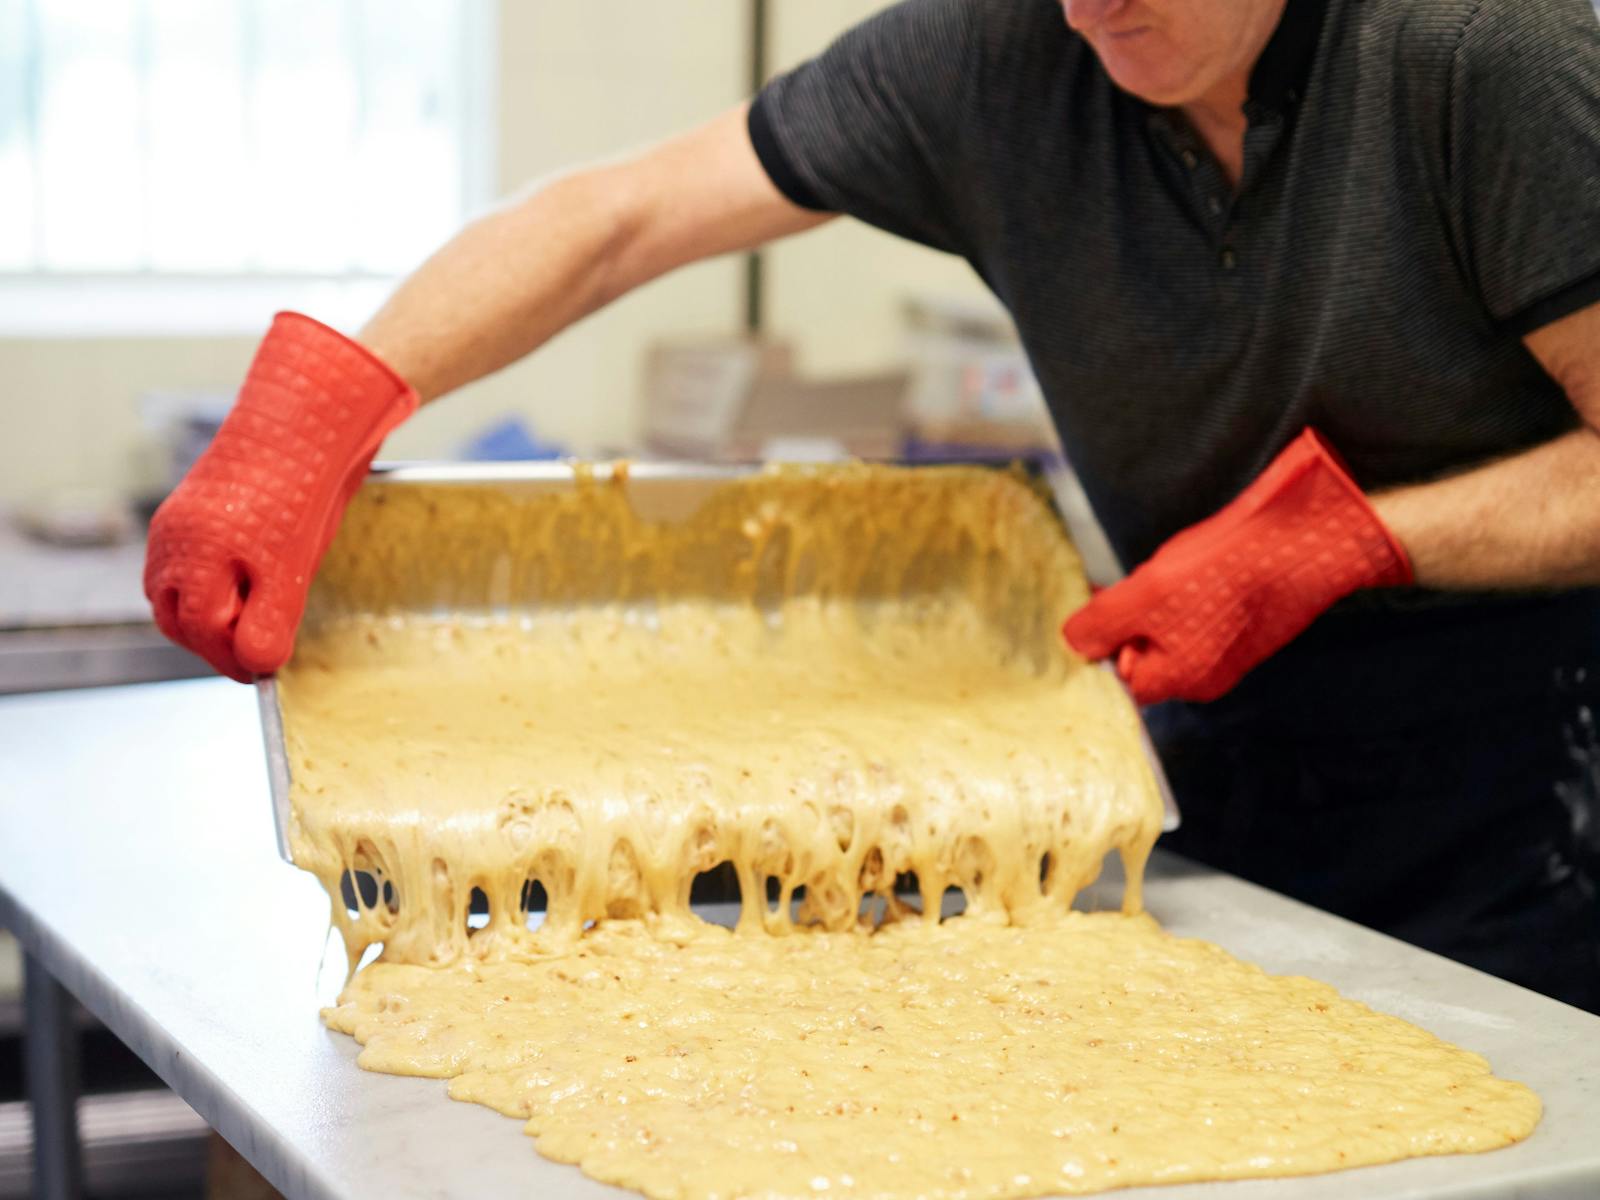 Making Peanut Brittle at The Treat Factory